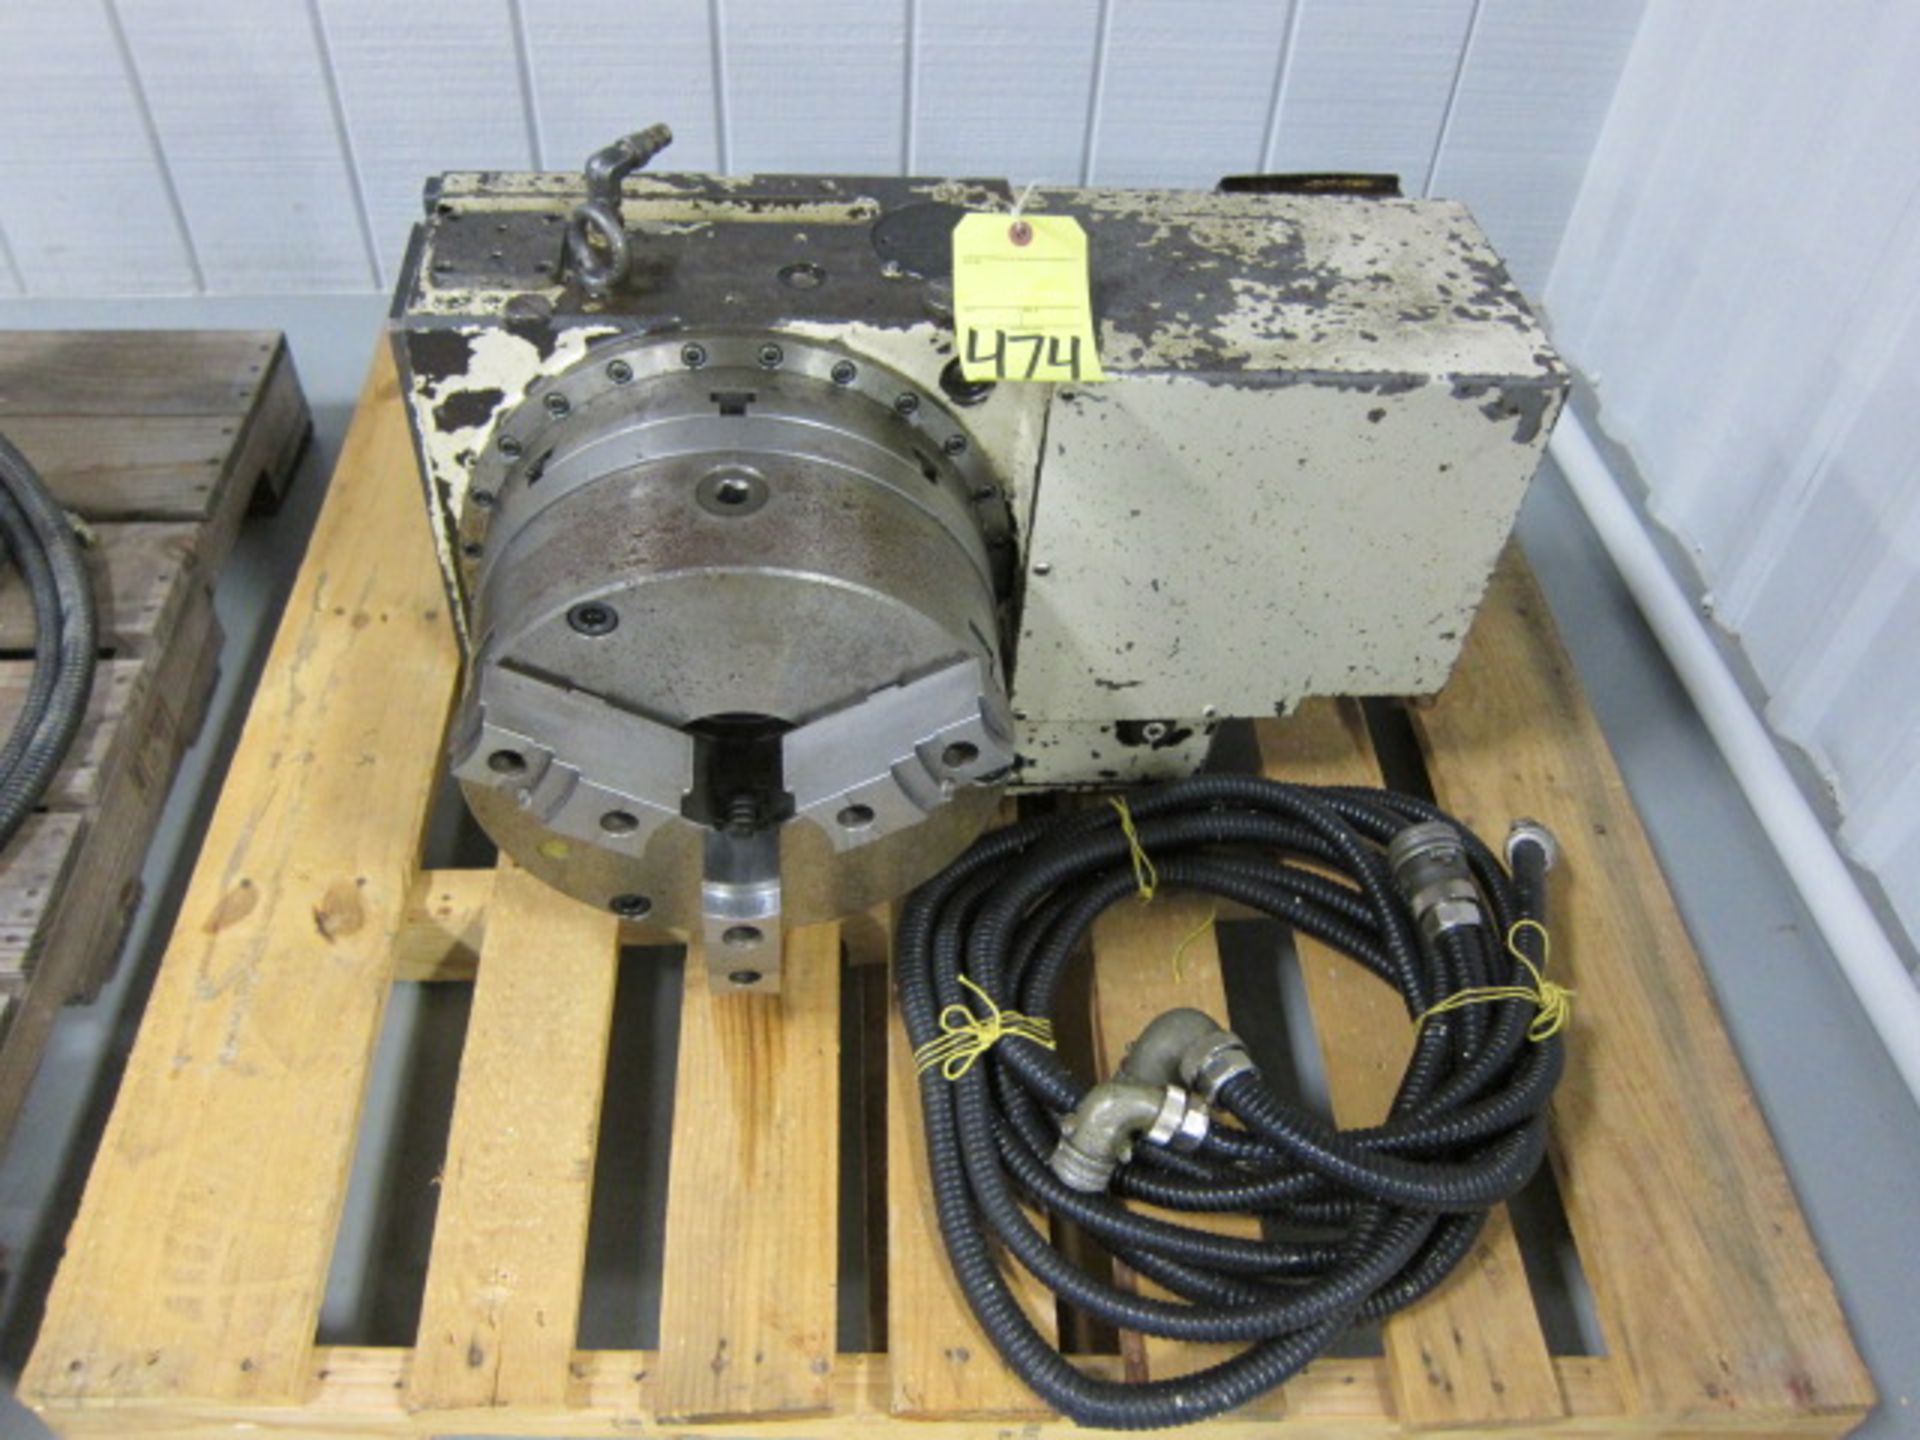 4TH AXIS ROTARY TABLE, TSUDAKOMA 12” MDL. RE300, 3-jaw chuck, tailstock